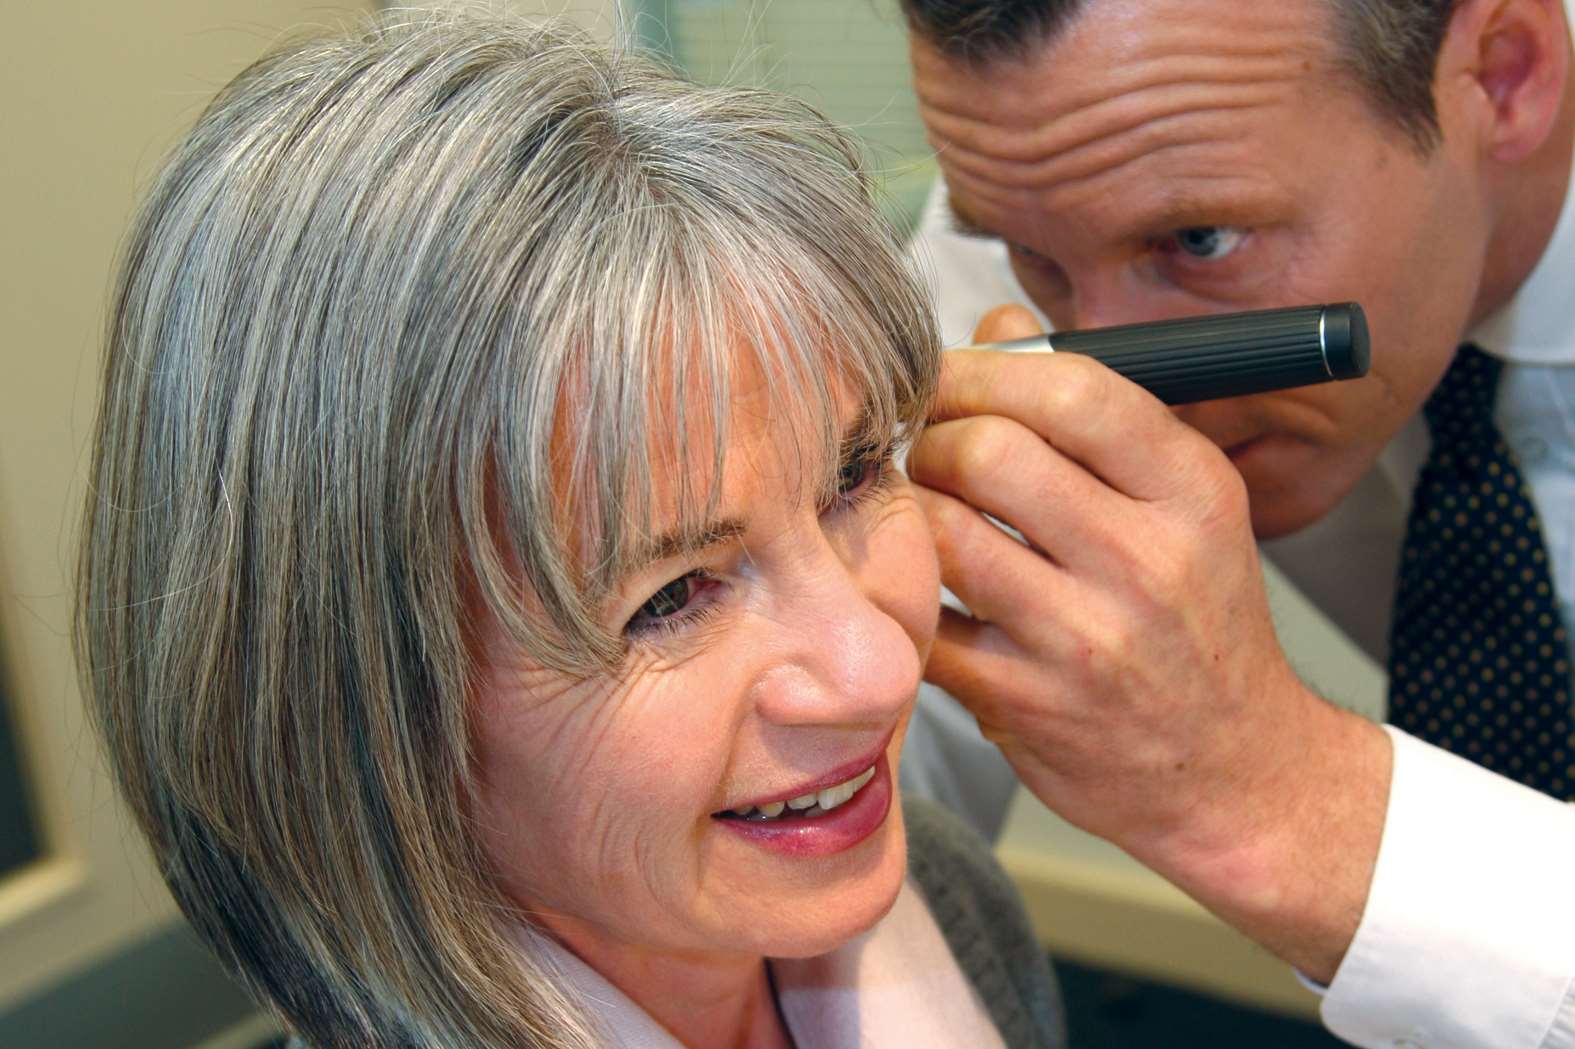 It’s estimated that 4 million people in the UK could benefit from a hearing aid